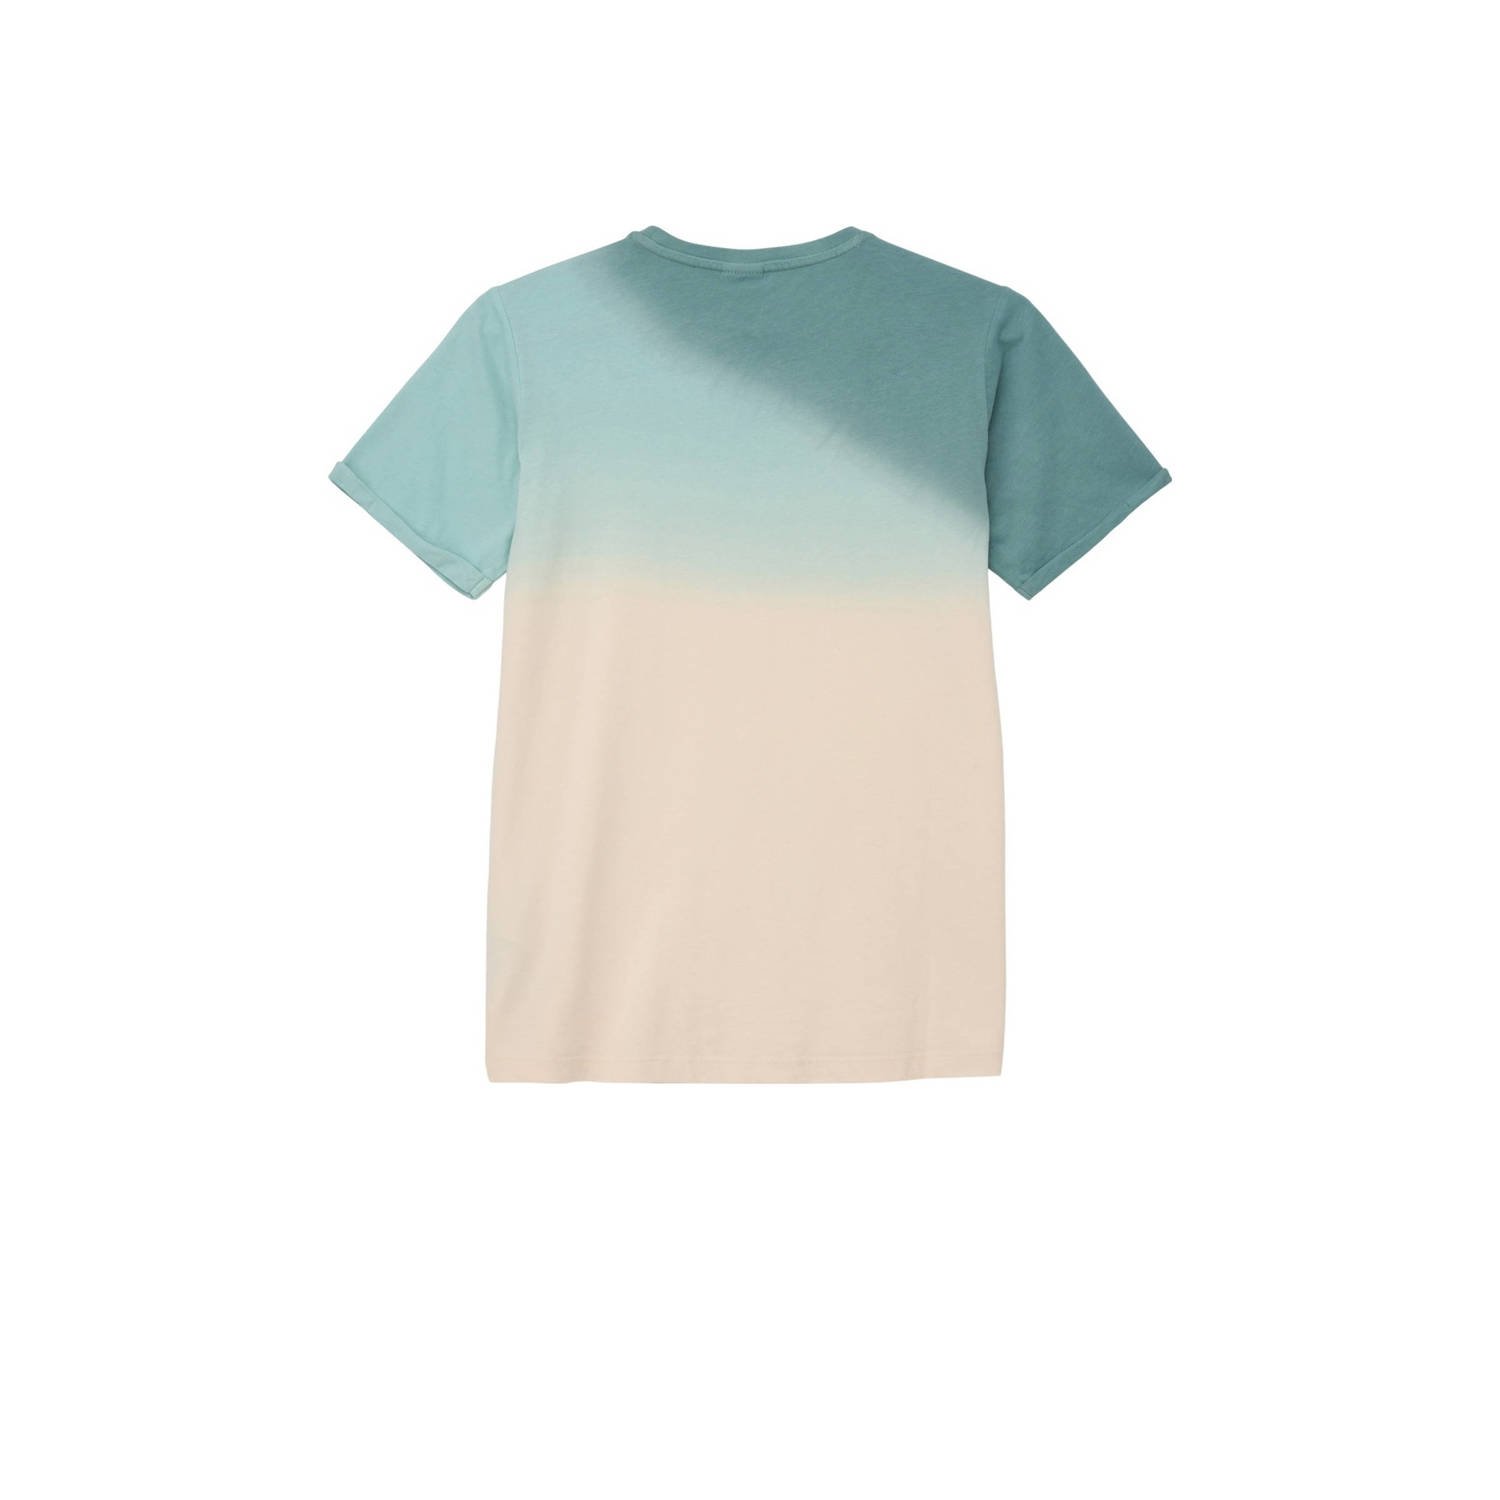 s.Oliver dip-dye T-shirt turquoise beige